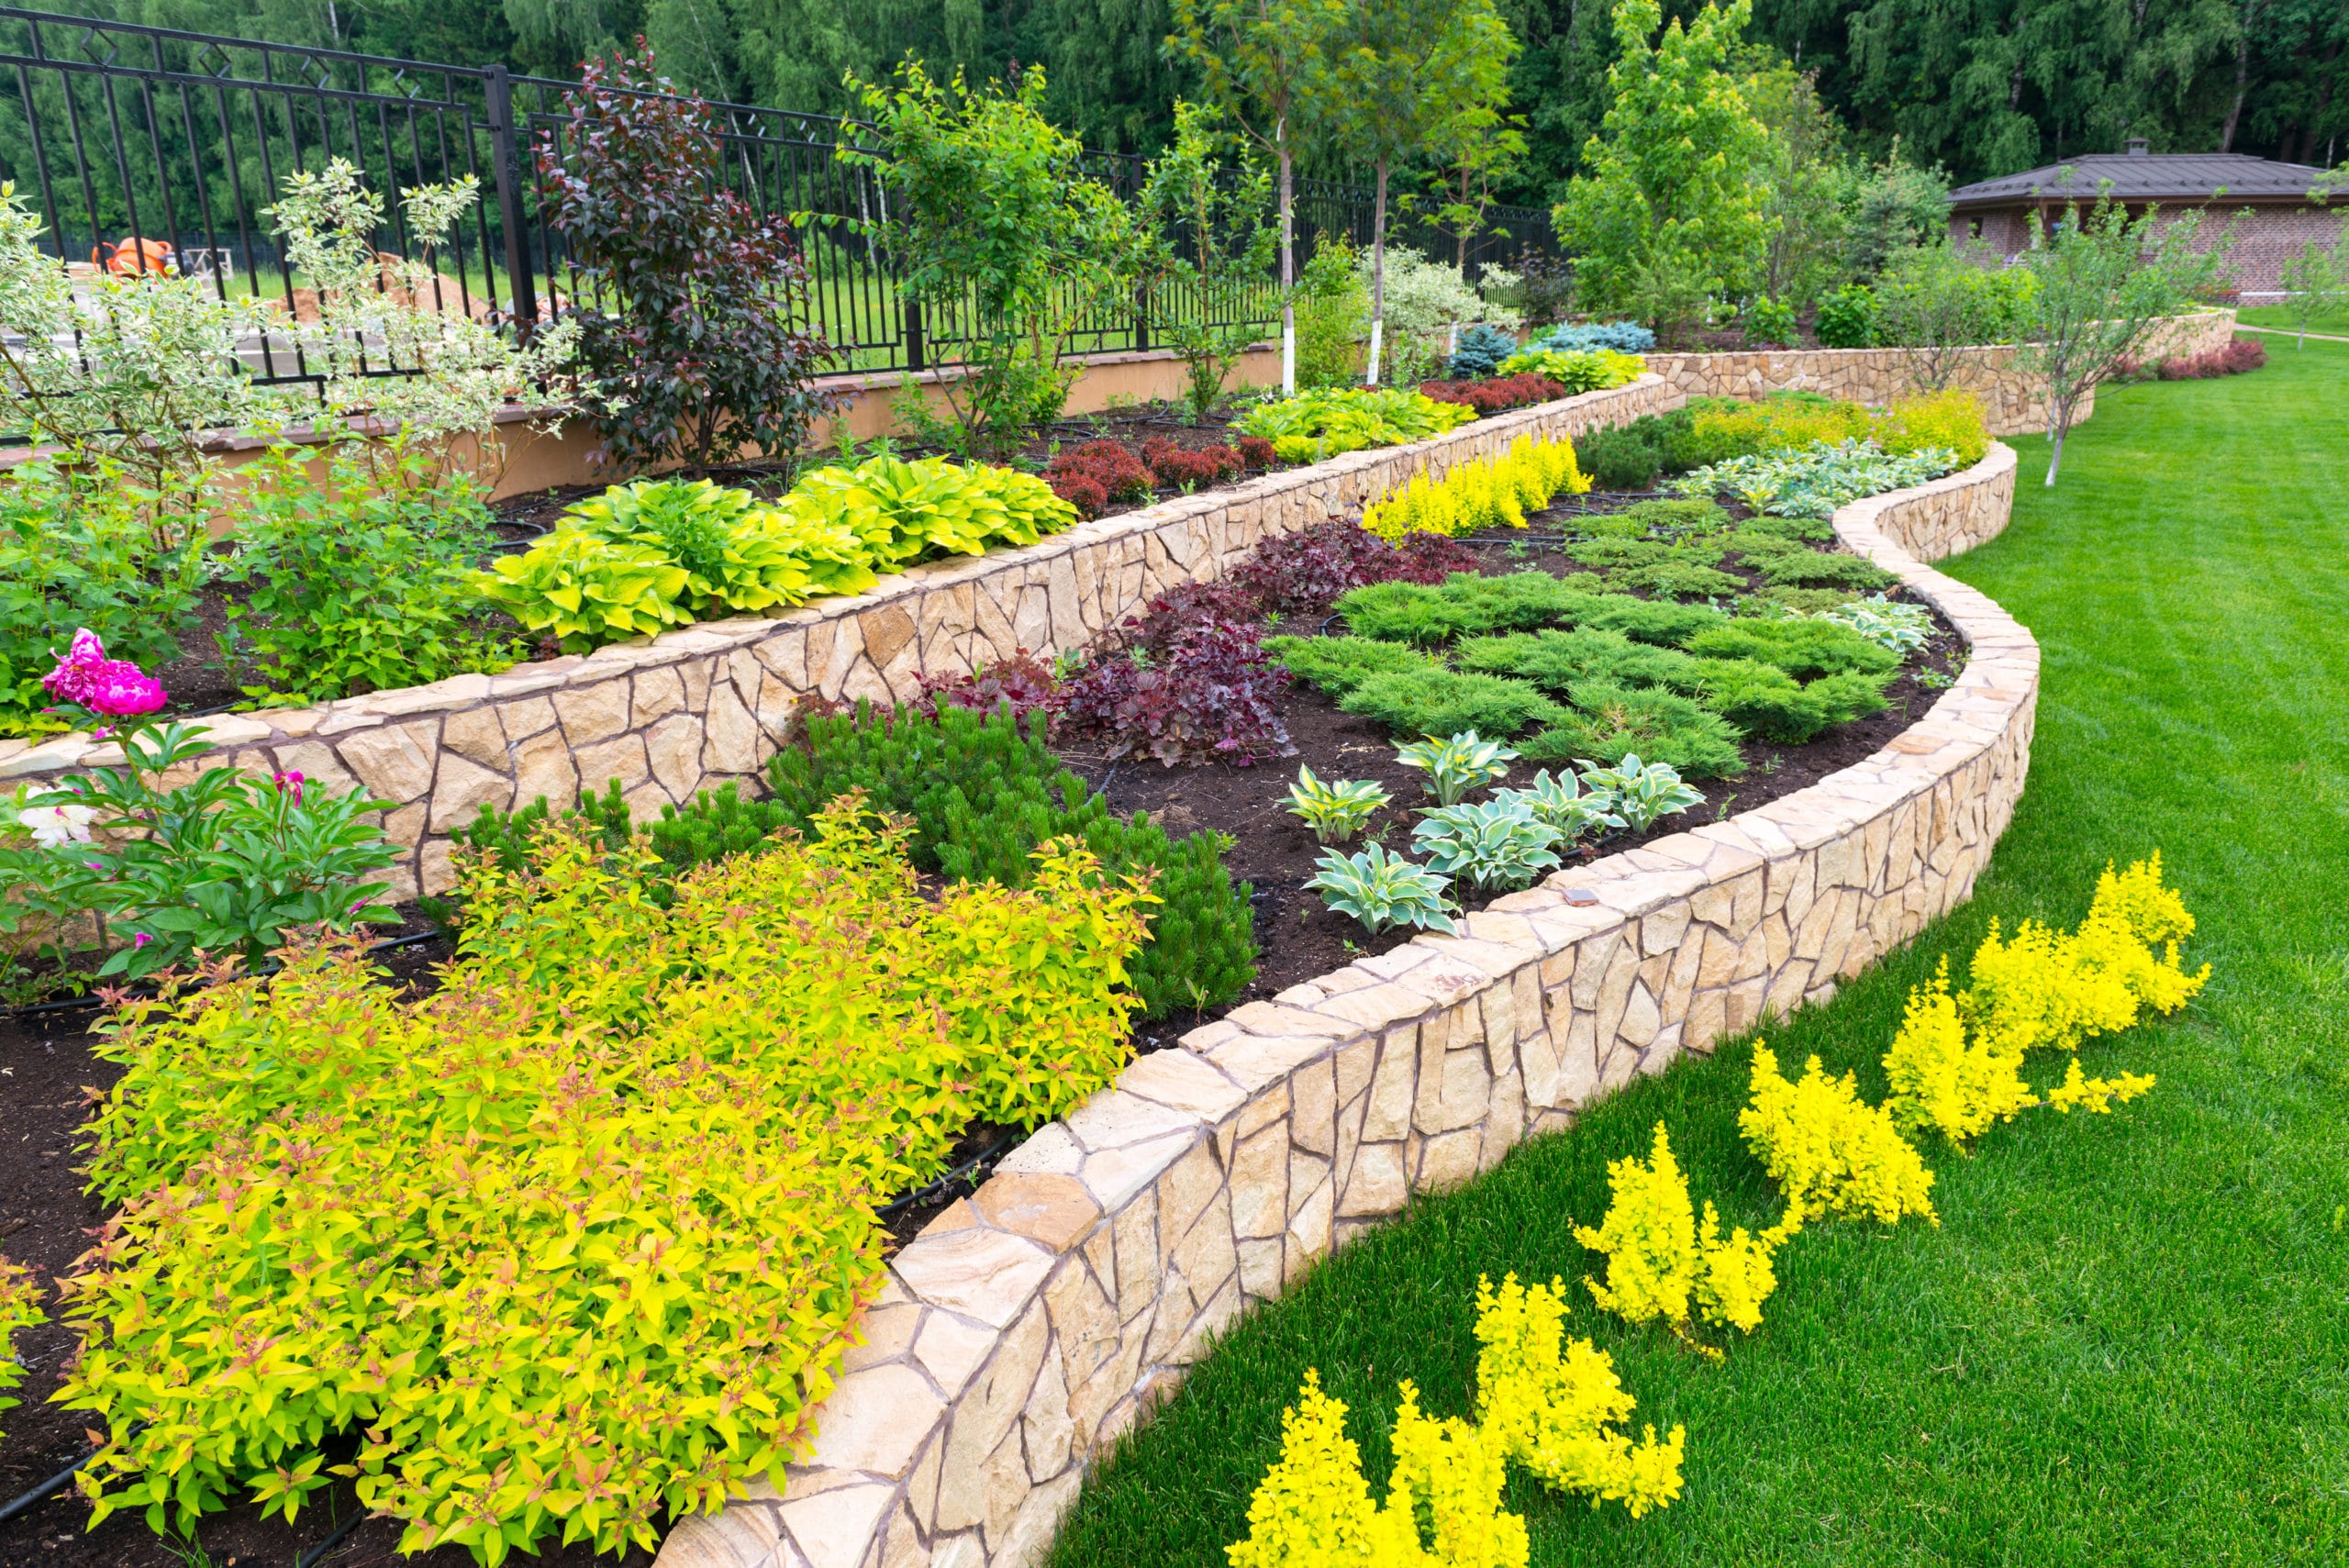 Making Your Landscaping Pop This Season featured image